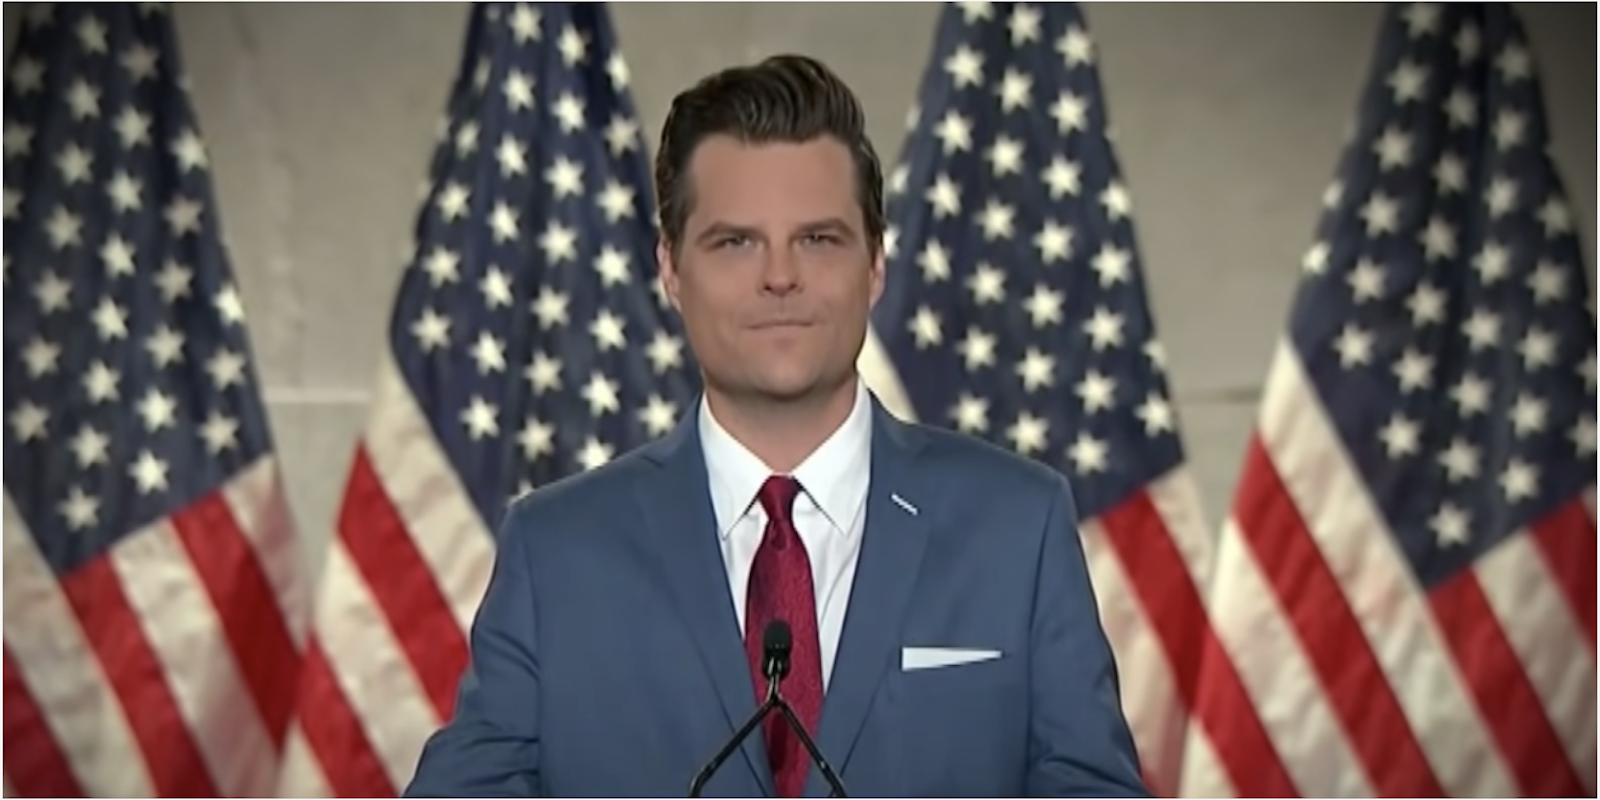 An announcement from Rep. Matt Gaetz was signed anonymously by the women who work for him